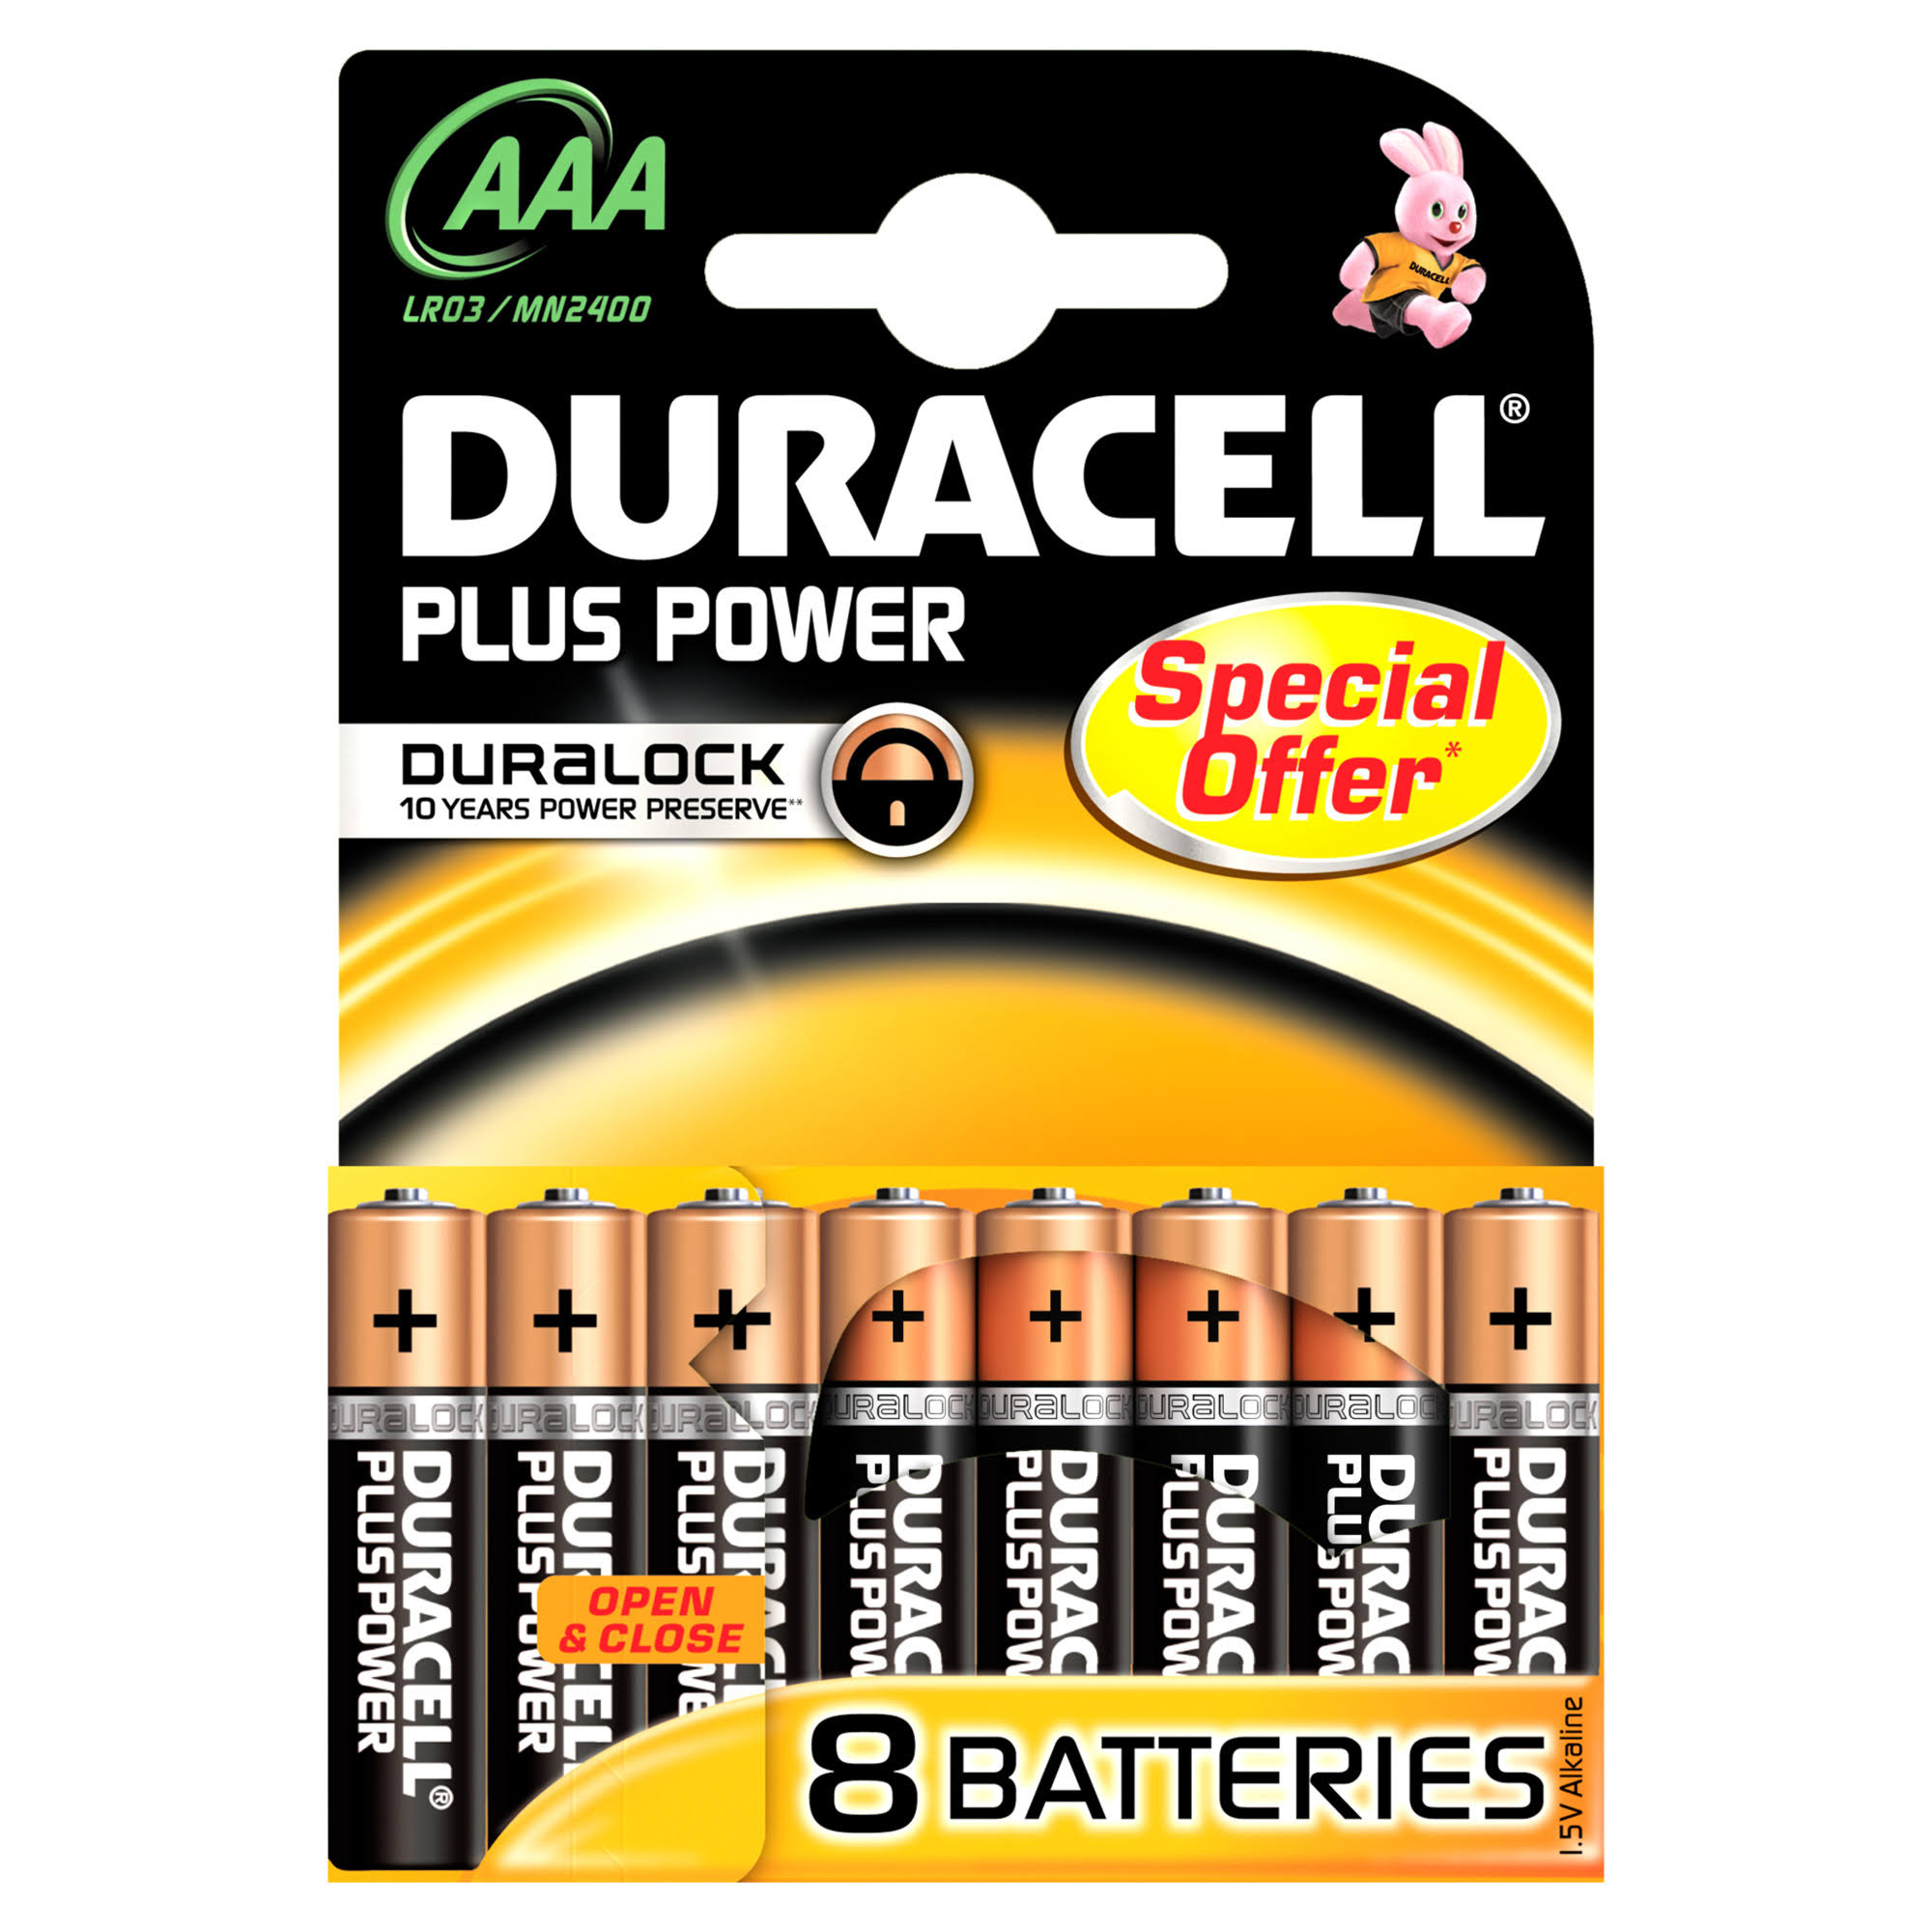 Duracell AAA Plus Power Batteries - 8 Pack